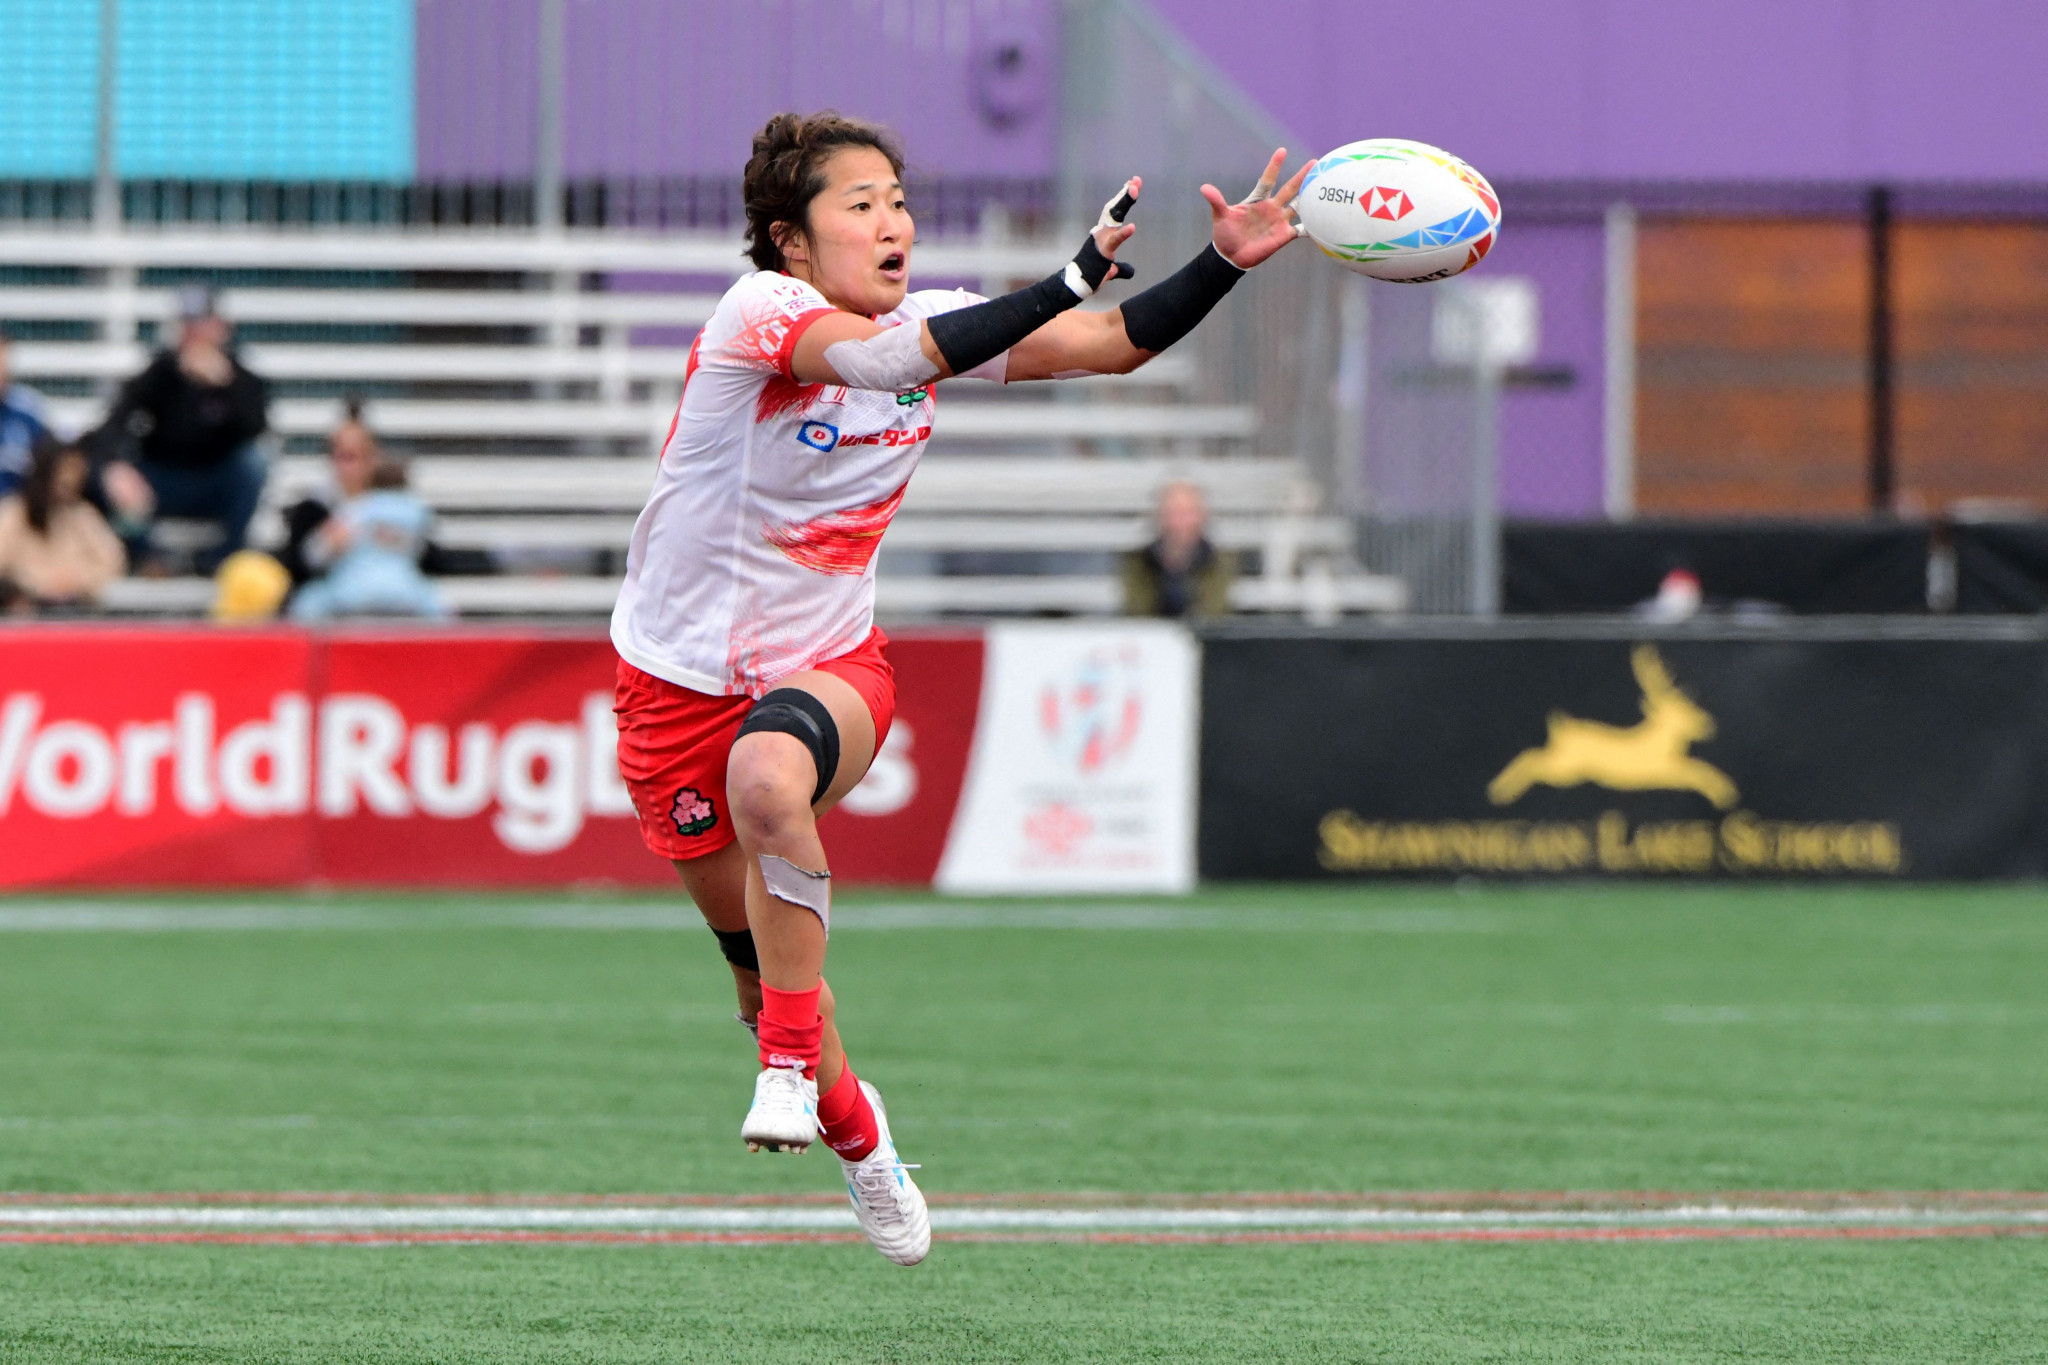 Uruguay and Japan win promotion to World Rugby Sevens Series